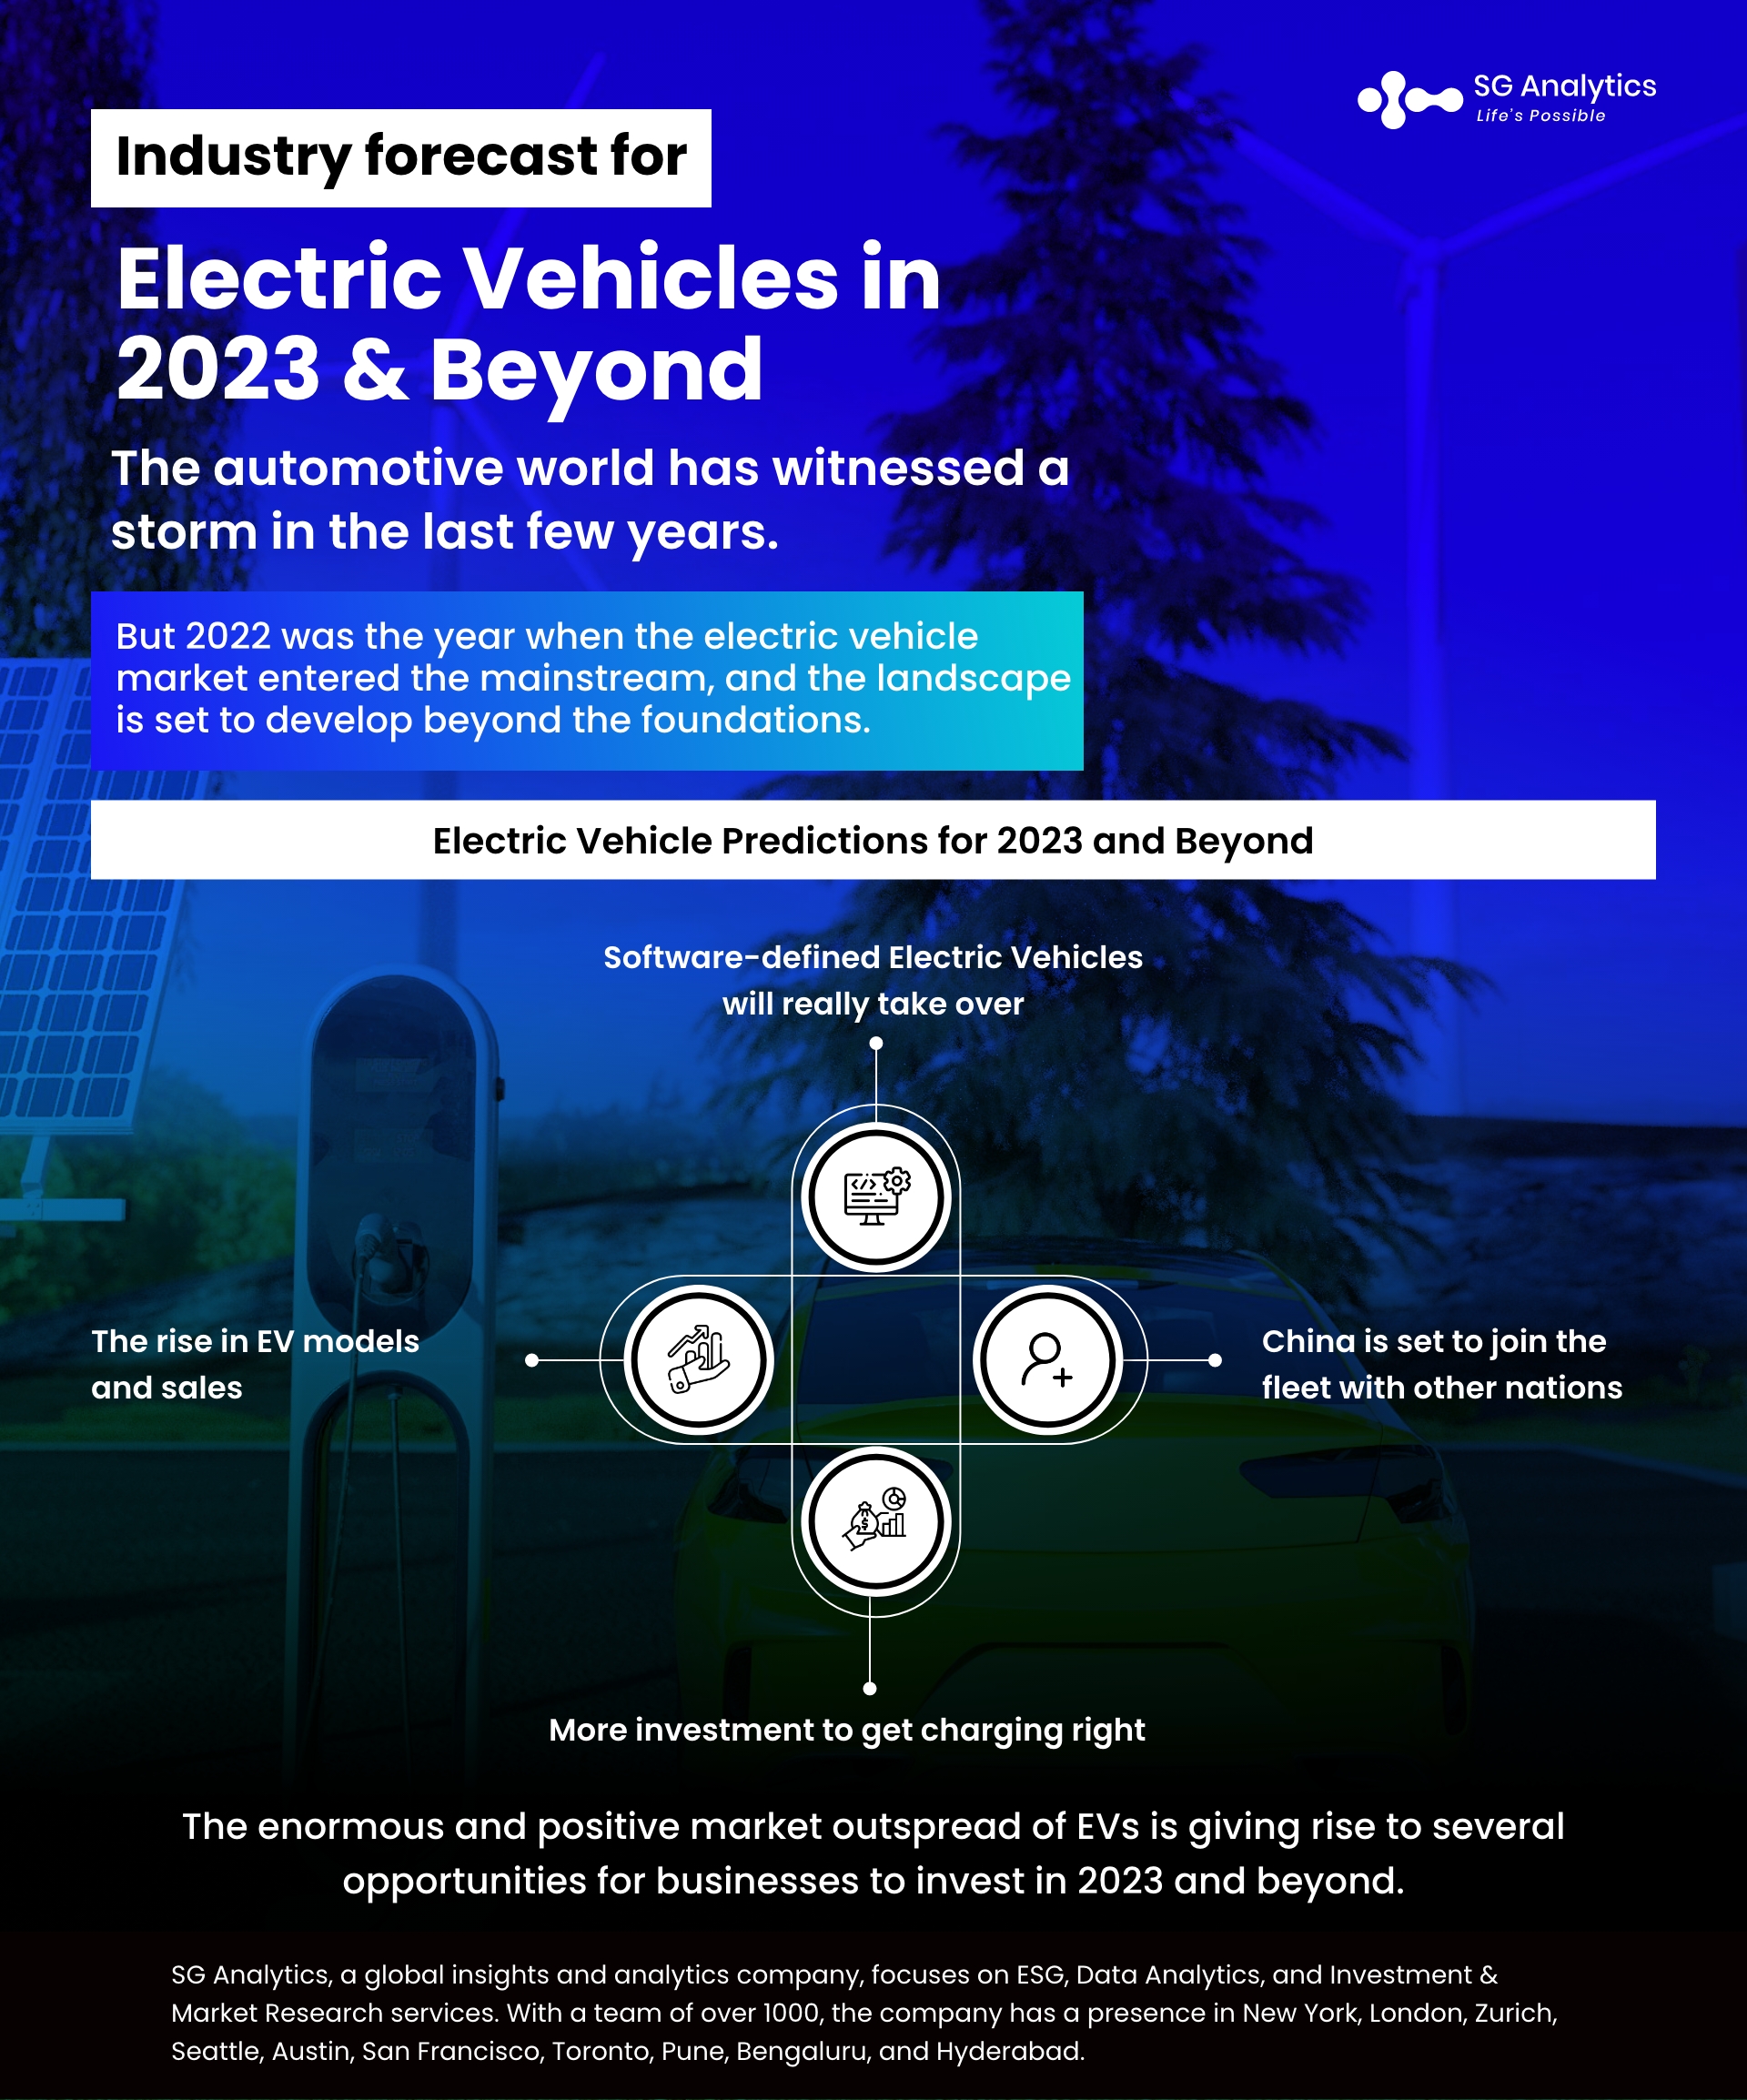 Industry forecast for Electric Vehicles in 2023 and Beyond